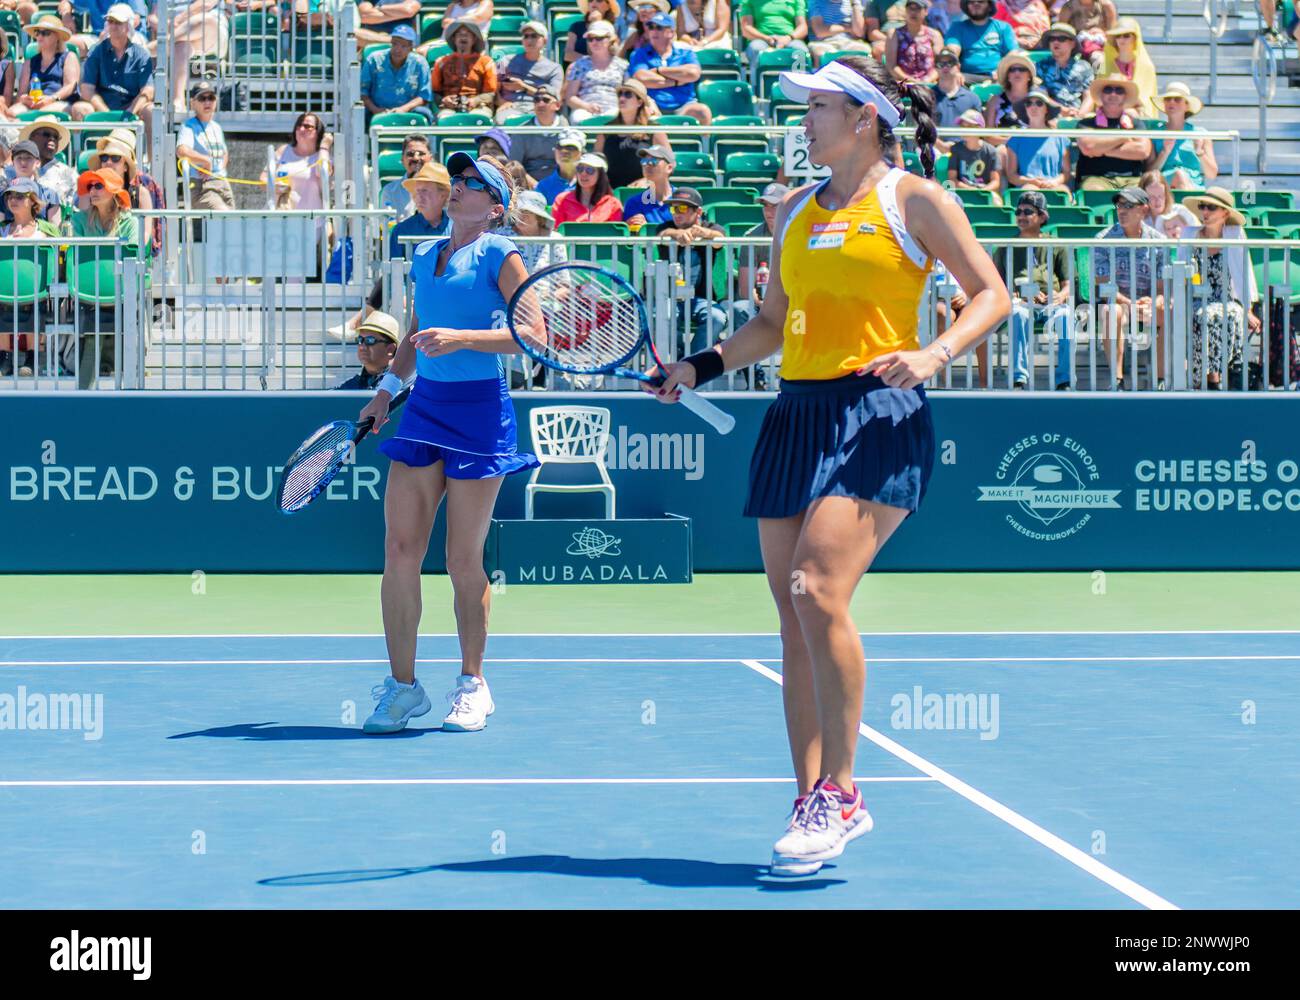 SAN JOSE, CA - AUGUST 05: Kveta Peschke (CZE) and Latisha Chan (TPE) sigh  after winning the WTA Doubles Championship match at the Mubadala Silicon  Valley Classic on the San Jose State